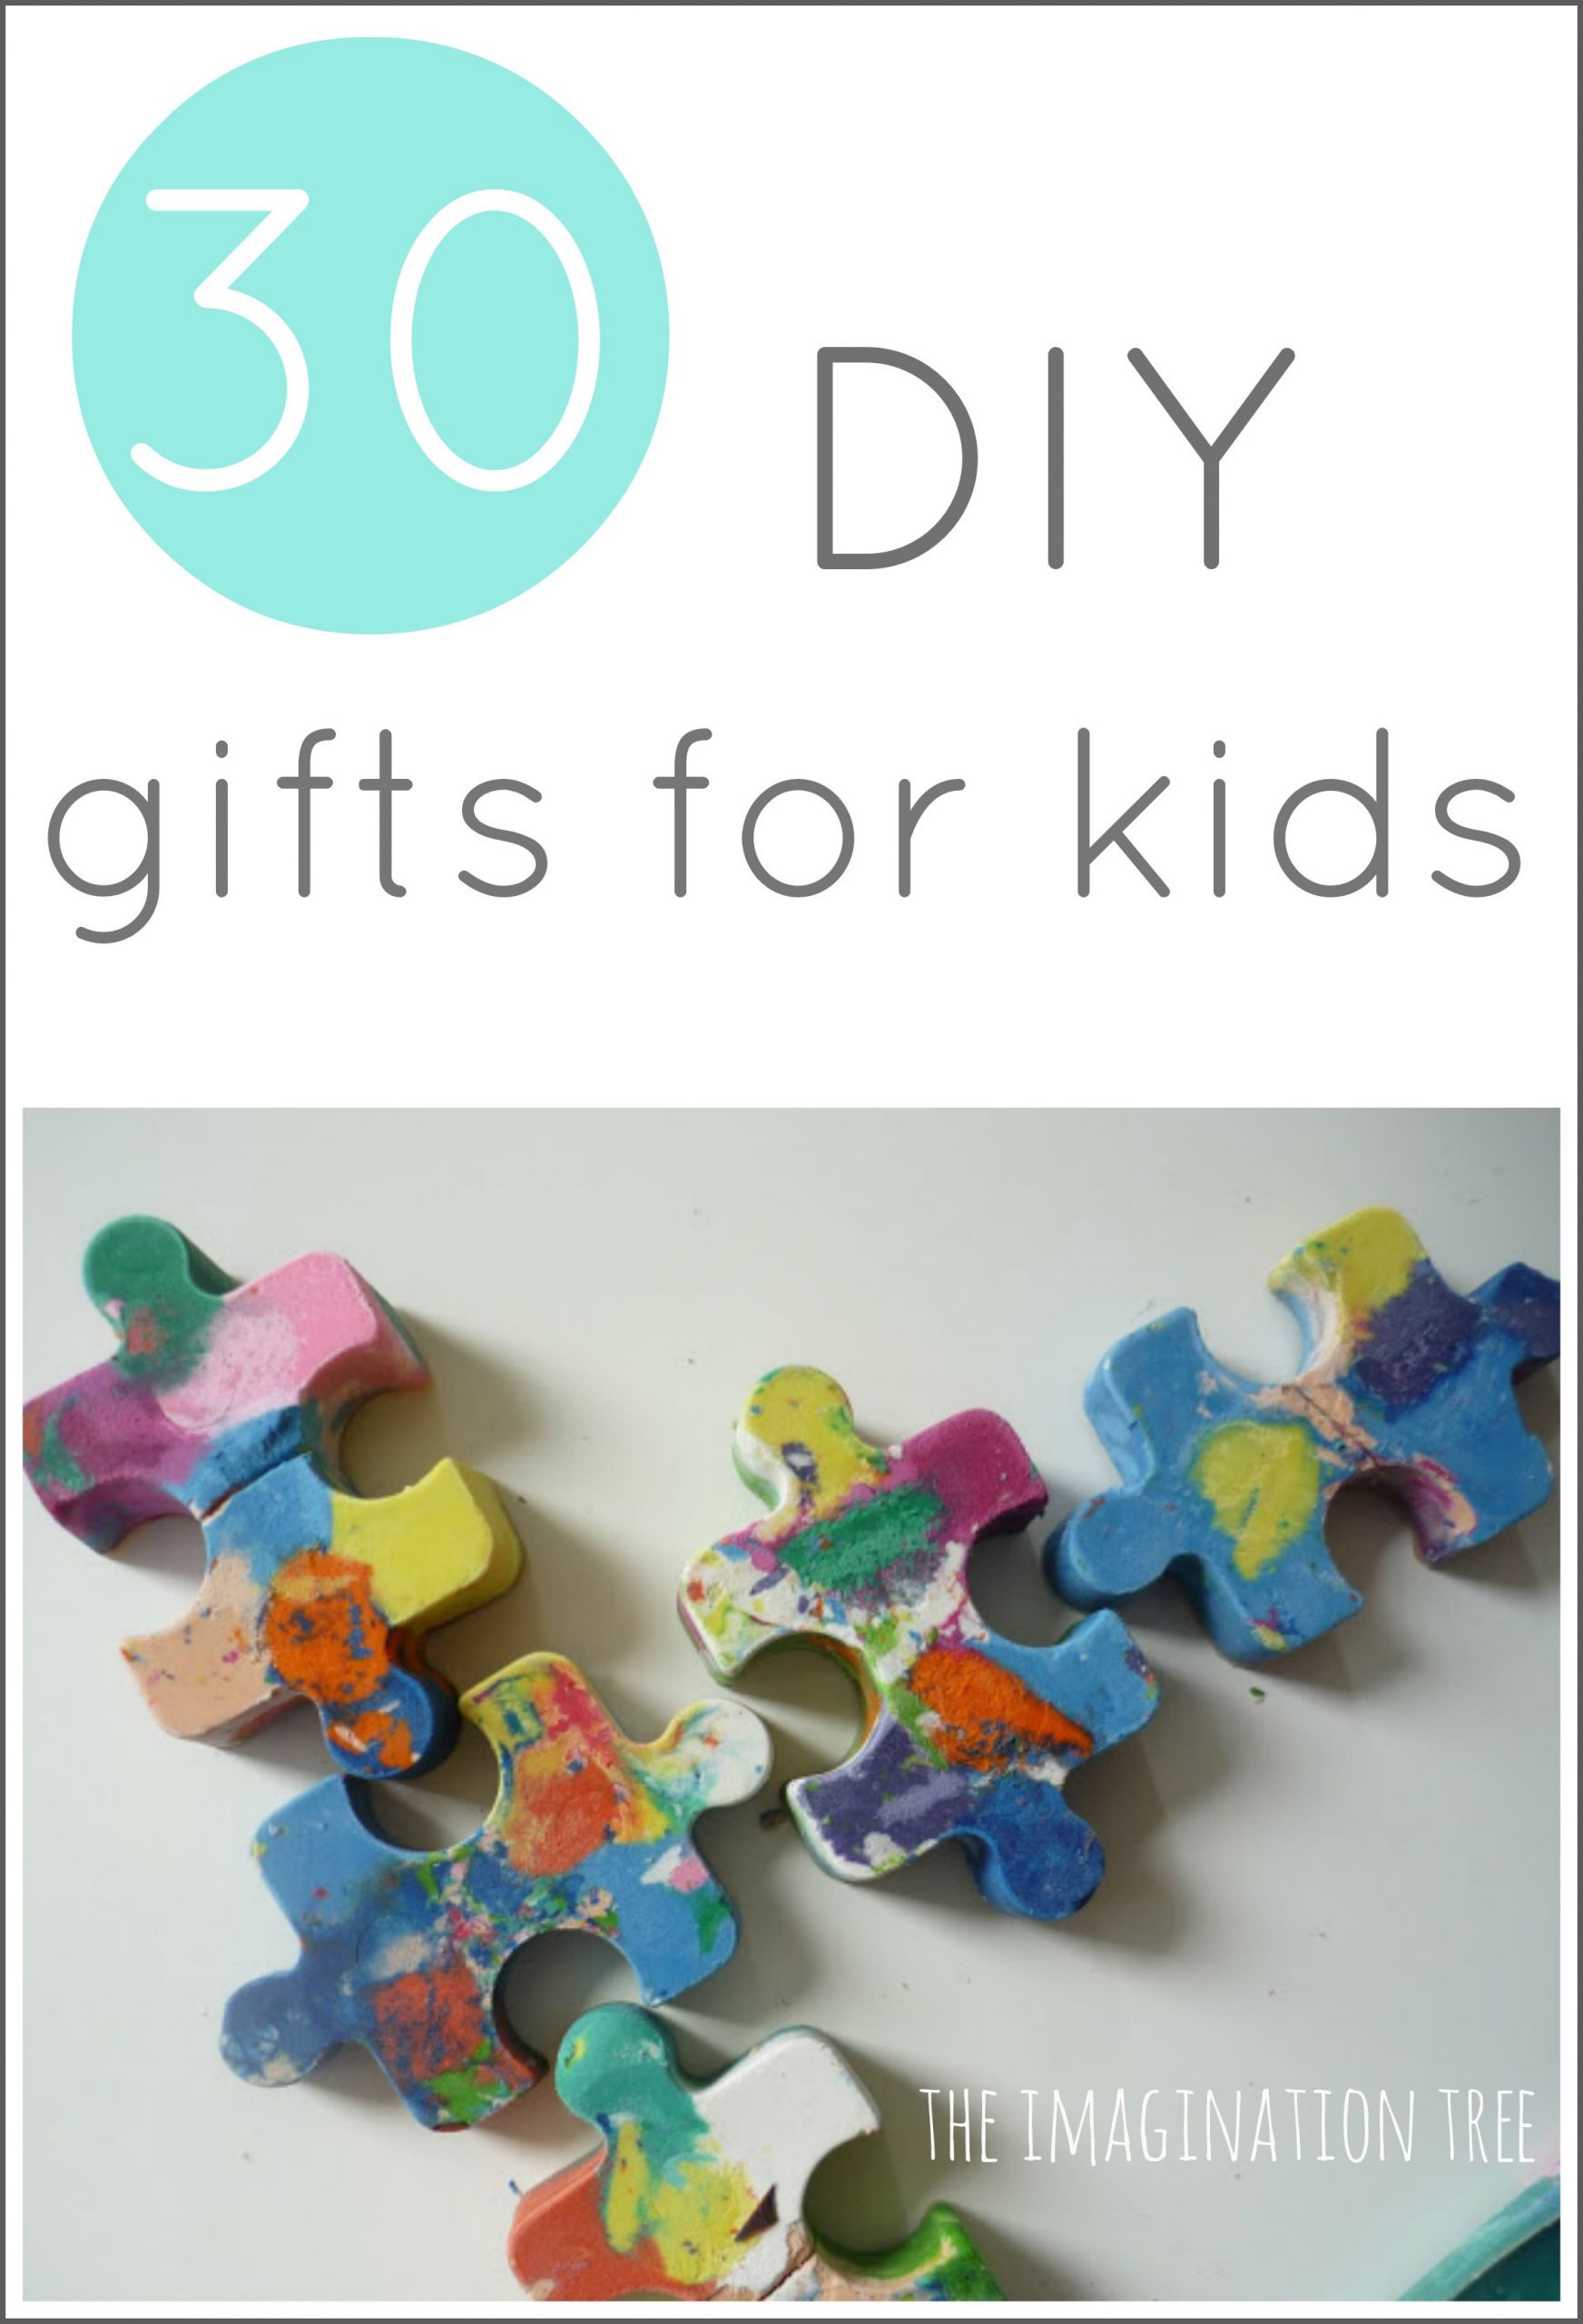 DIY Gift Ideas For Kids
 30 DIY Gifts to Make for Kids The Imagination Tree